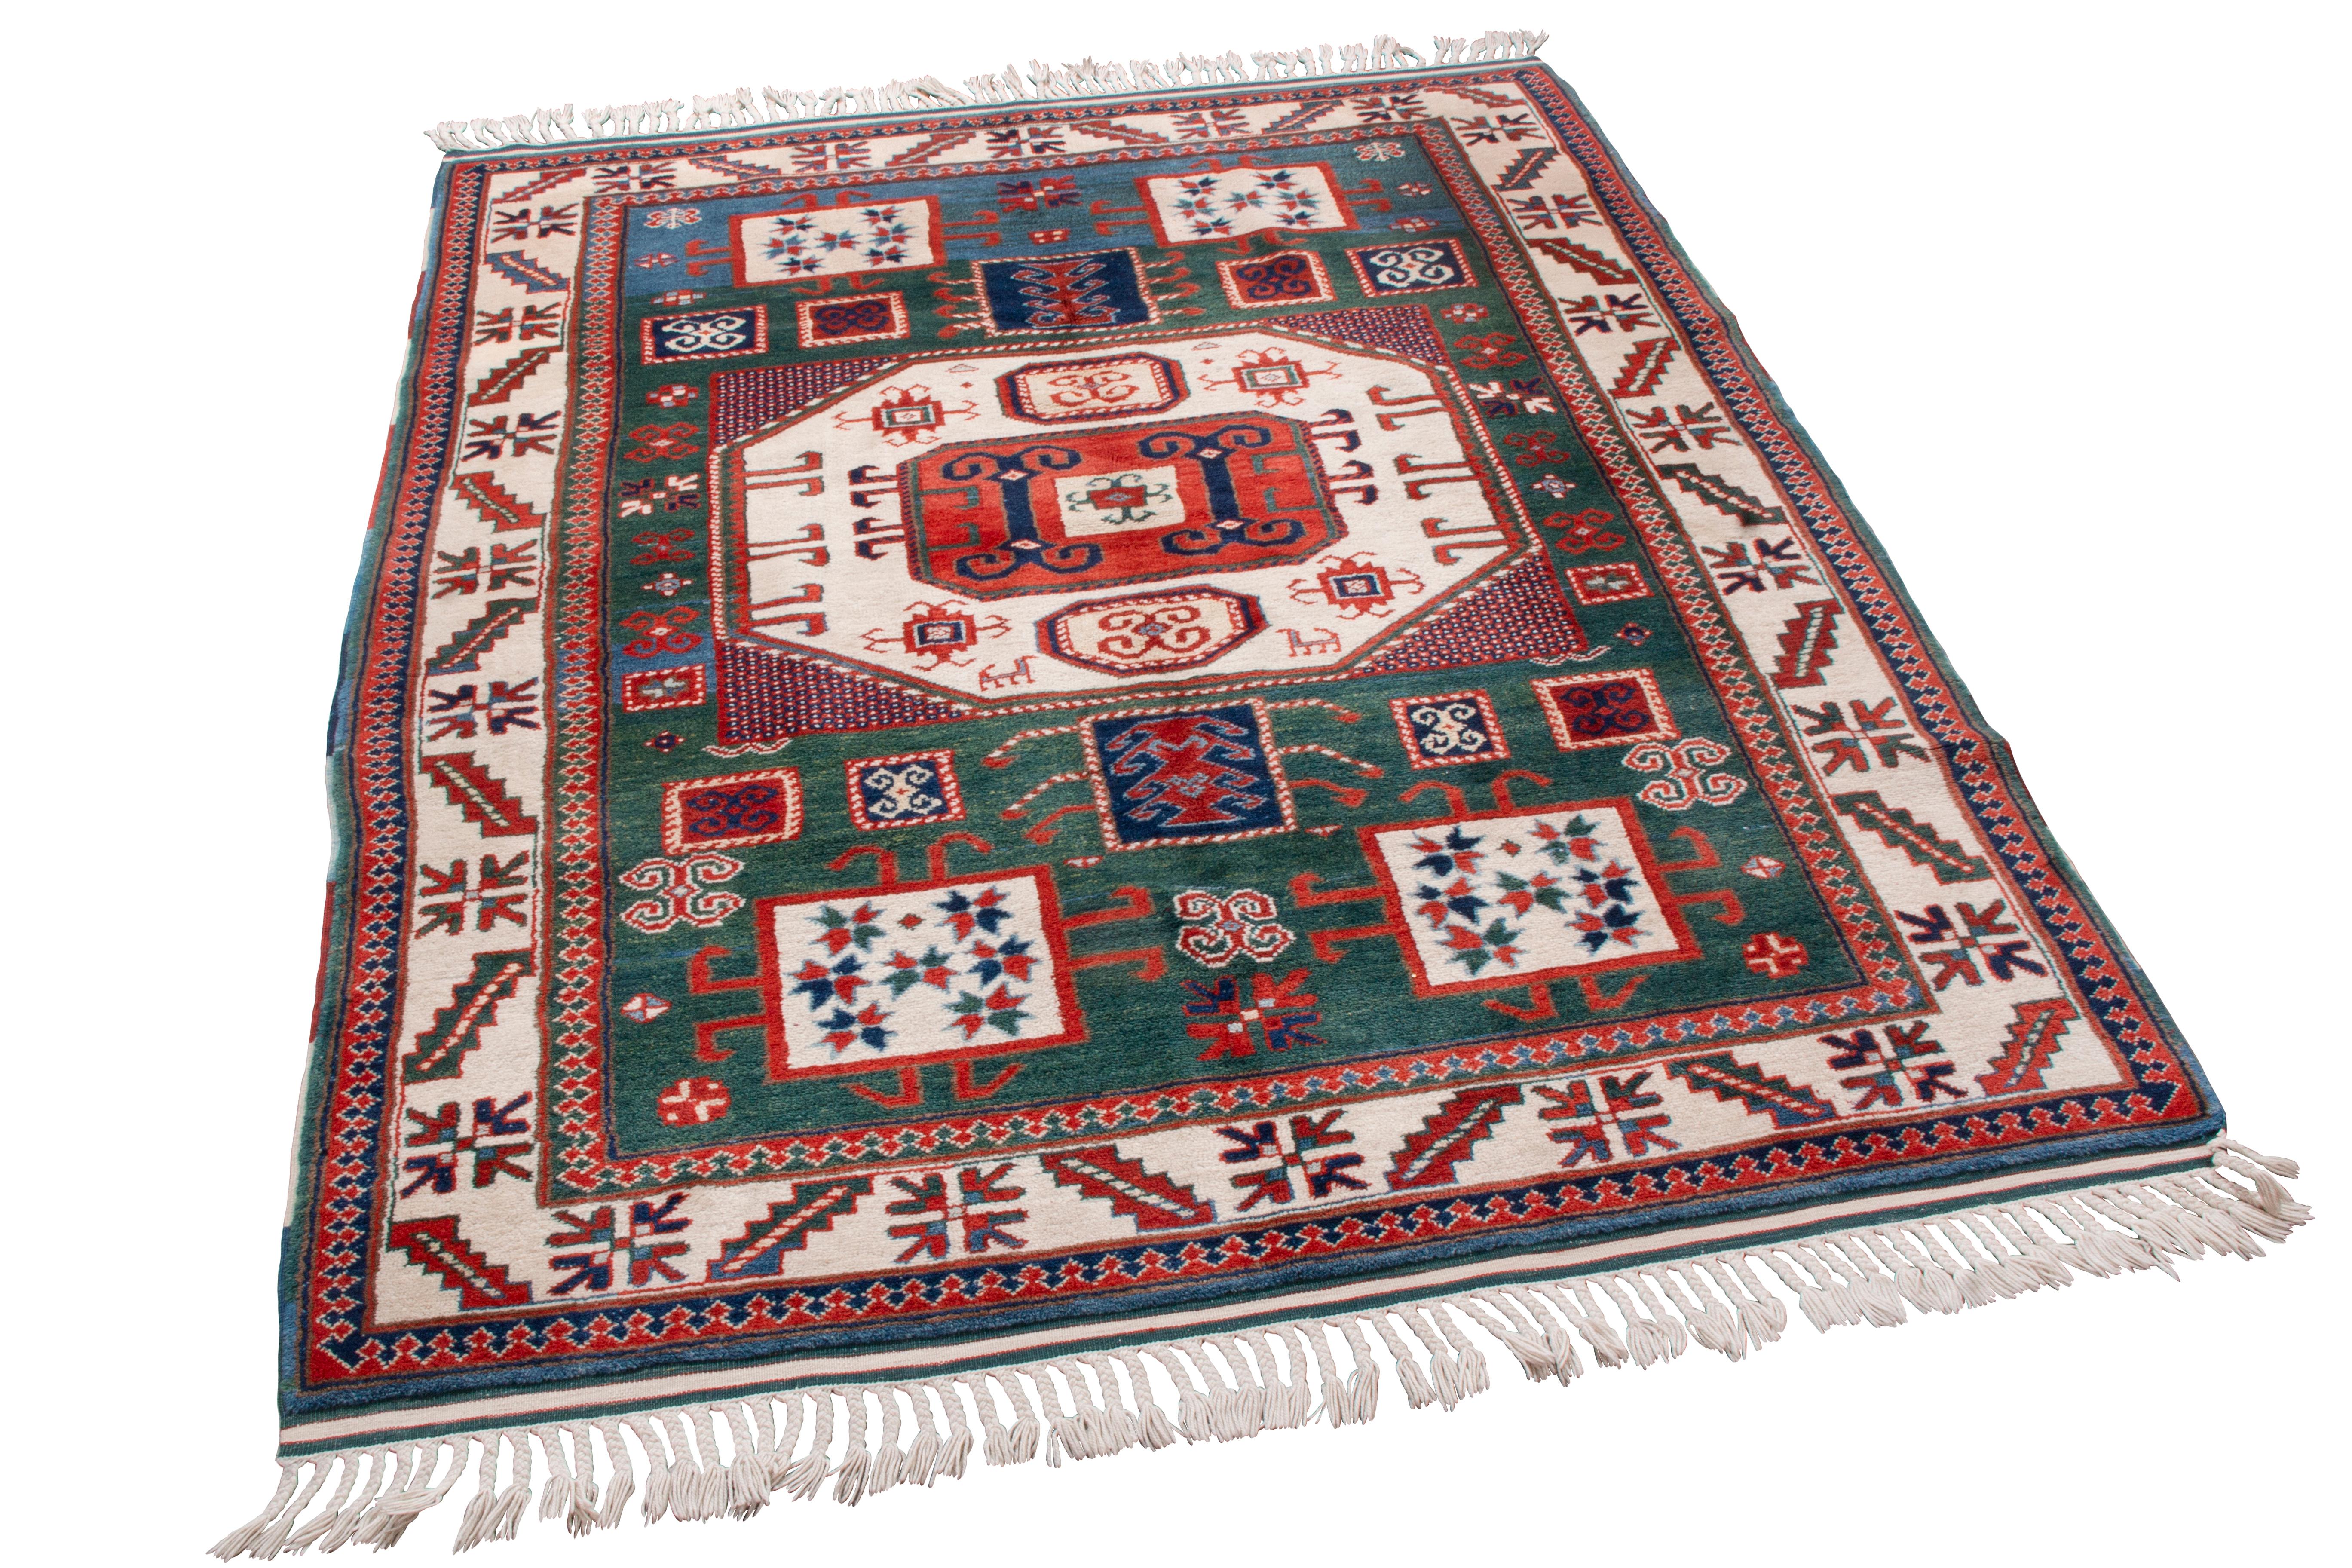 Originating from Turkey, this new Kazak transitional wool rug sports abundant Turkish ram Horn symbols throughout the field design. As traditional symbols of strength and resilience, it is uncommon to see more than a few, let alone more than a dozen